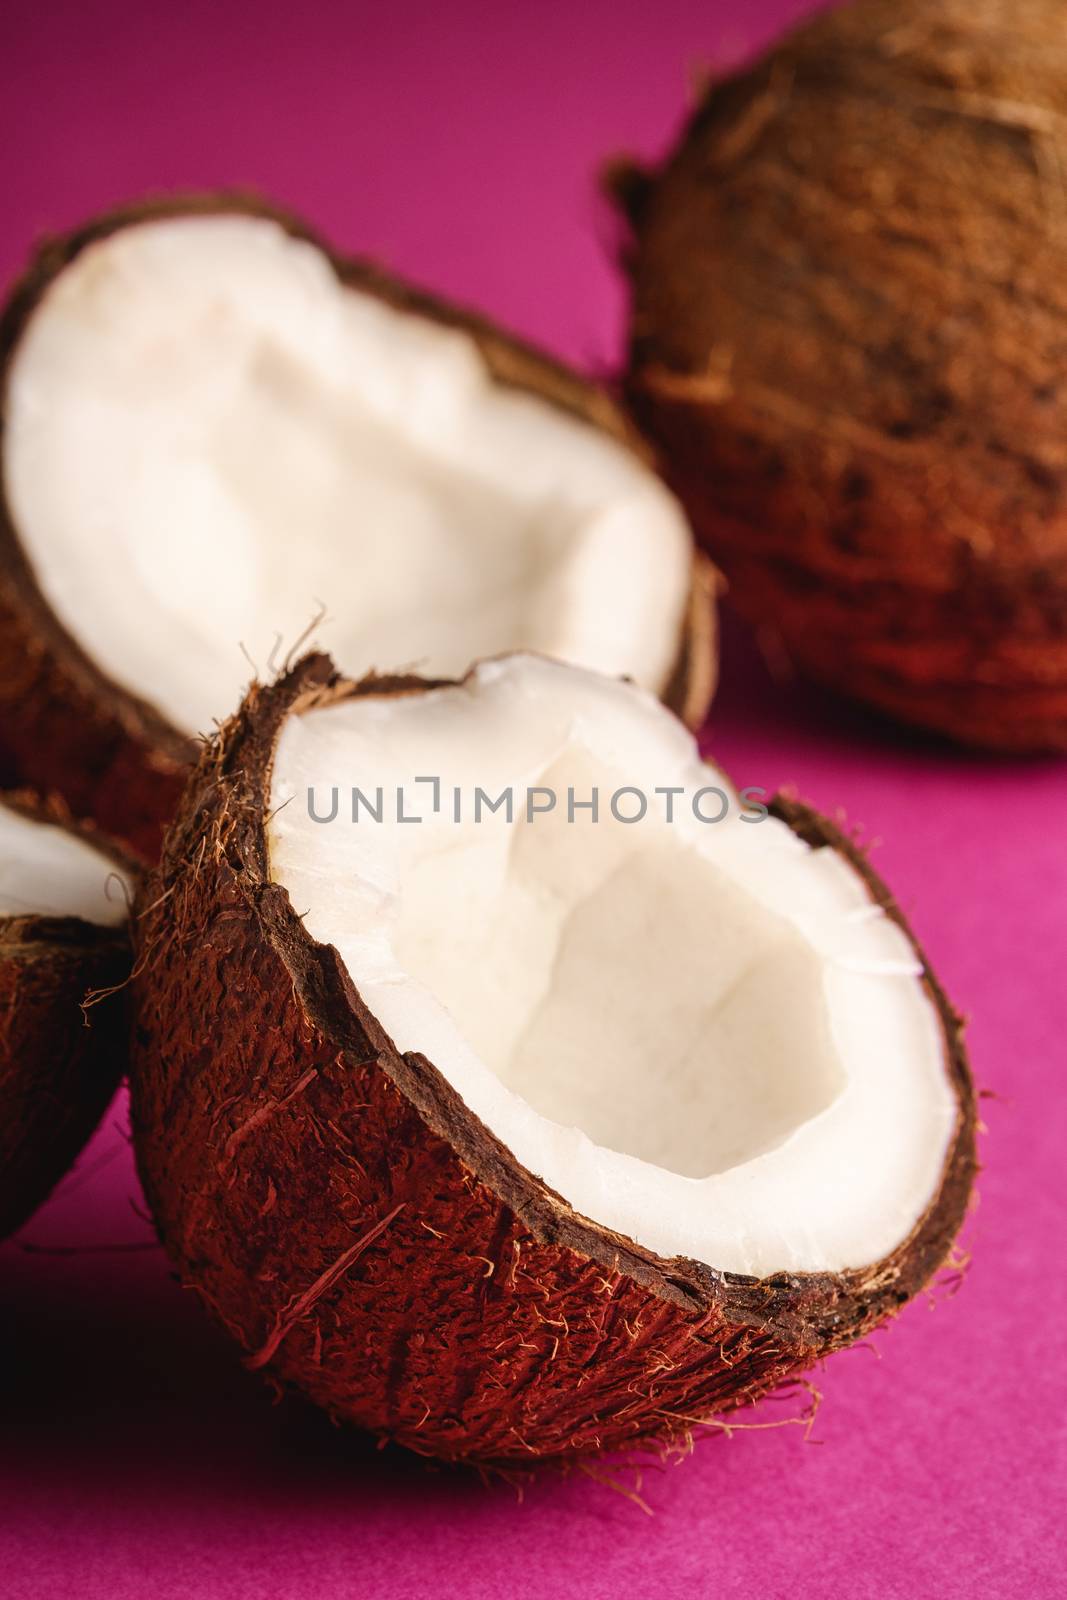 Coconut fruits on pink purple vibrant plain background, abstract food tropical concept, angle view macro